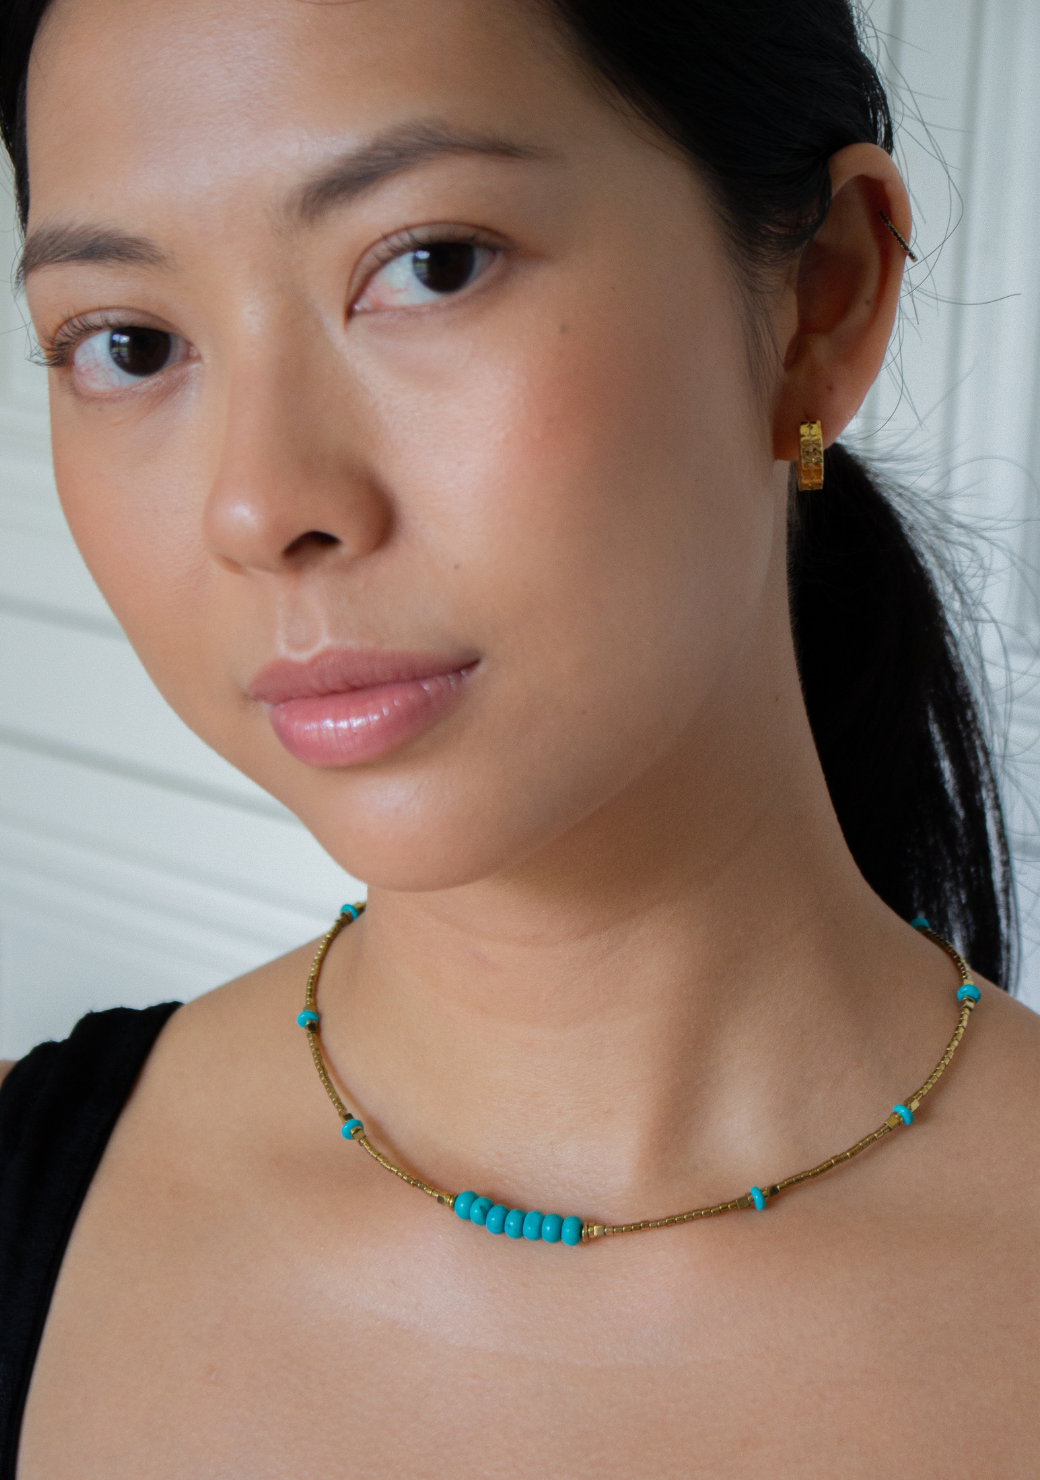 Rondelle Necklace in Gold with Turquoise